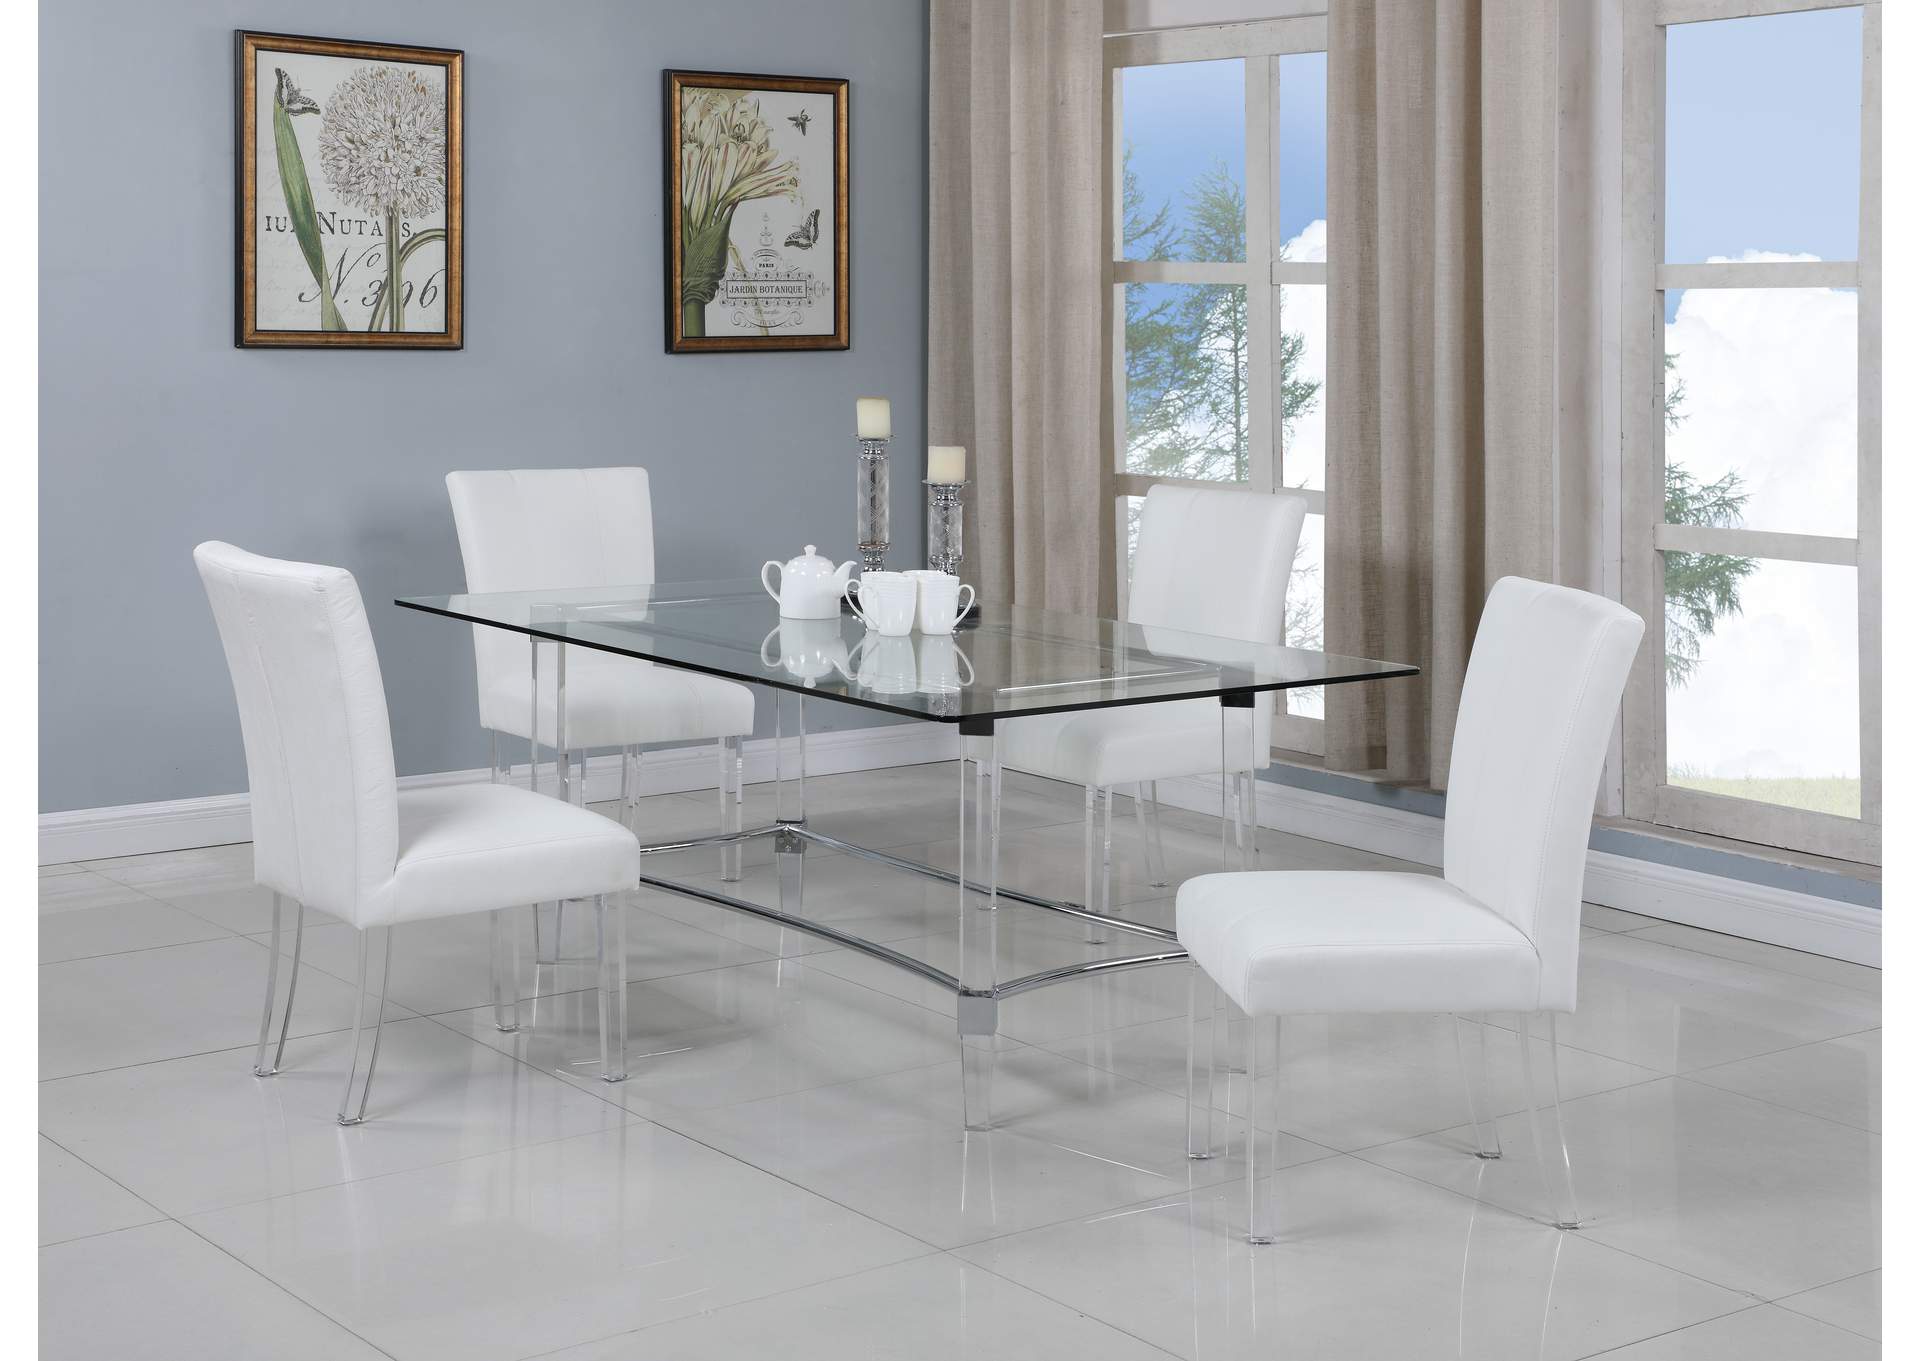 Contemporary Dining Set W Rectangular Glass Dining Table Parson Chairs Harlem Furniture